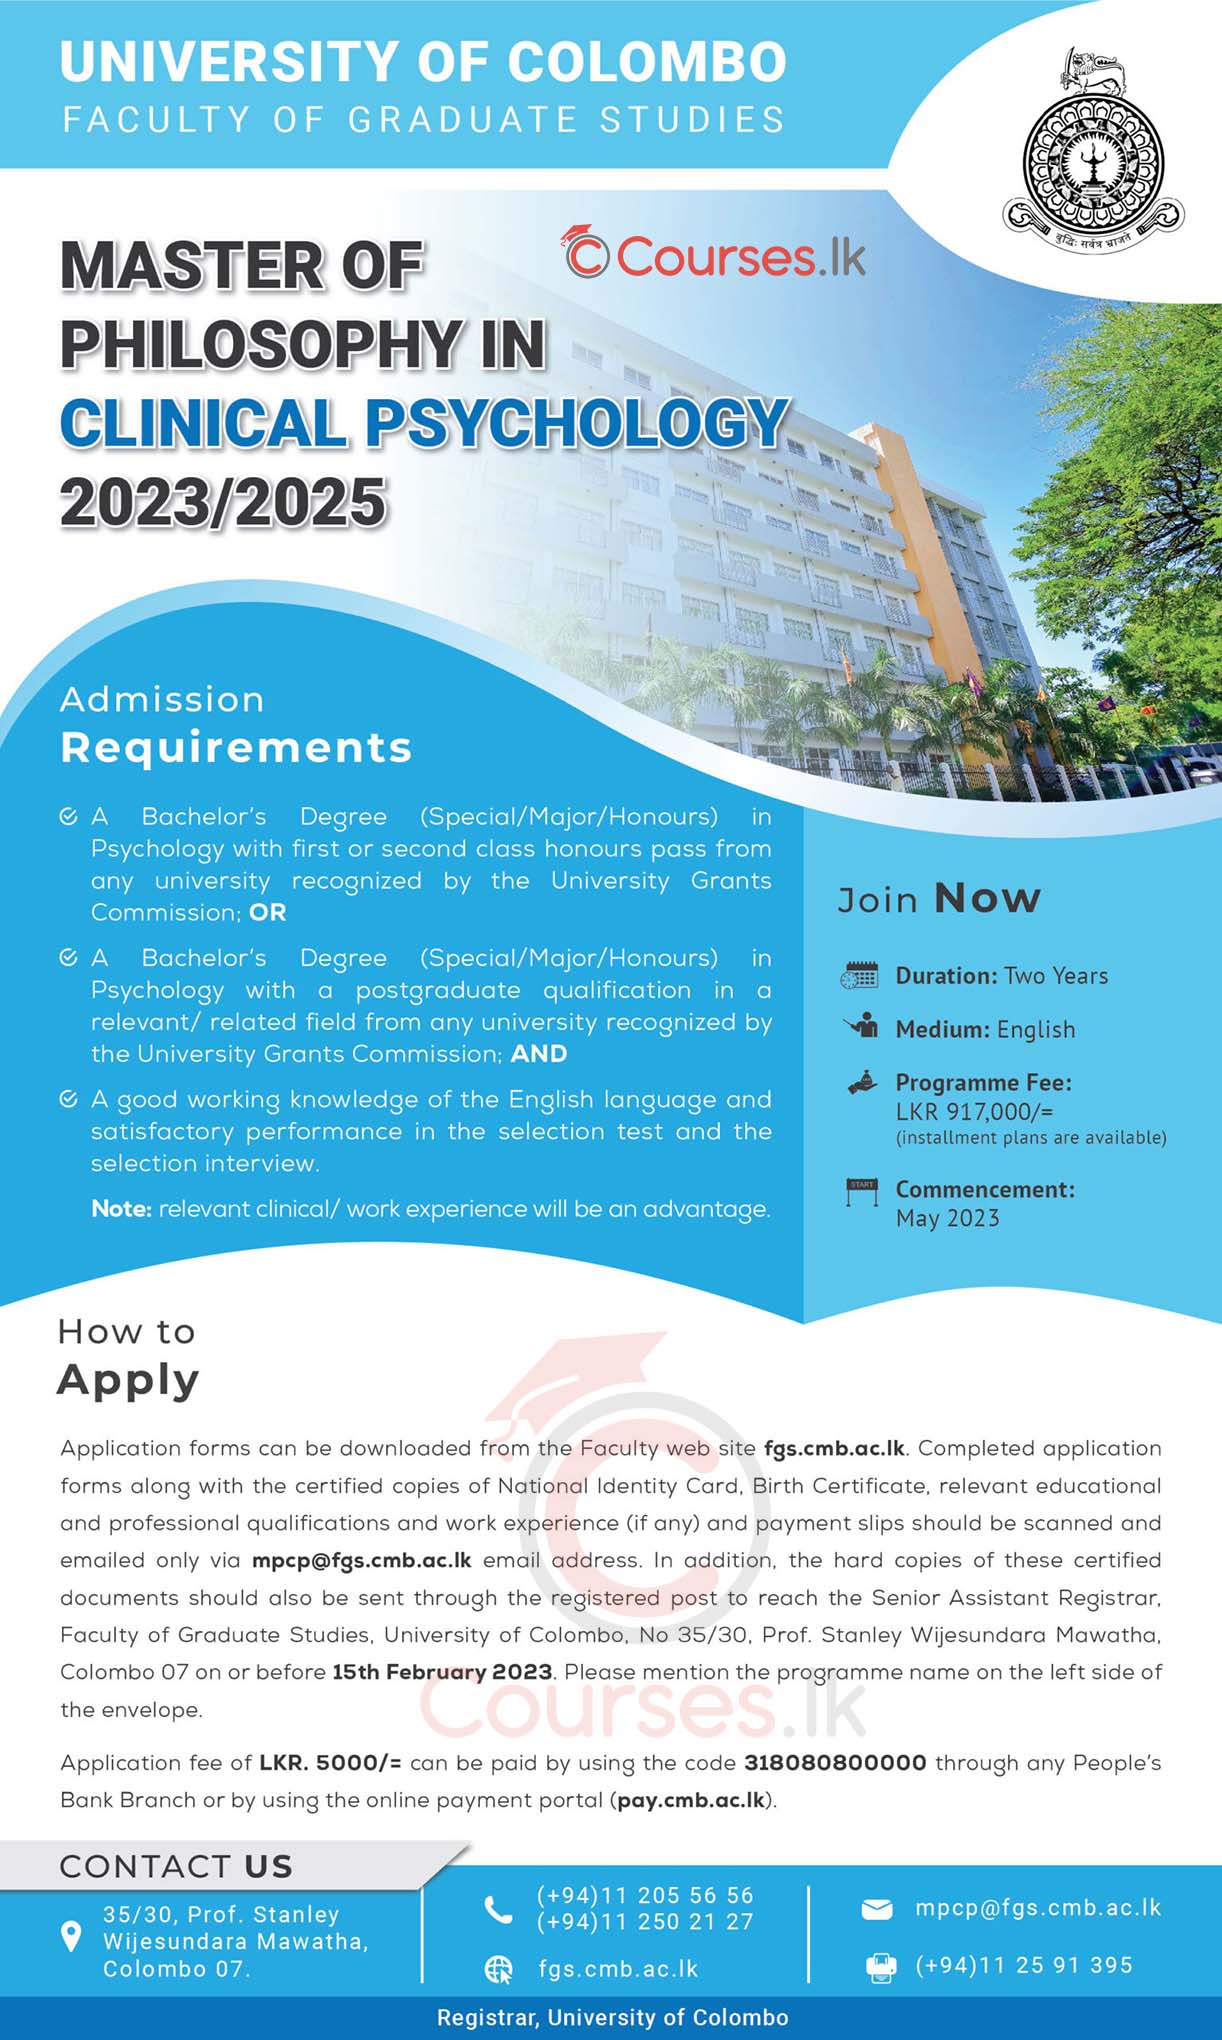 Call for Applications - Master of Philosophy (MPhil) in Clinical Psychology Programme 2023/2025 from the University of Colombo